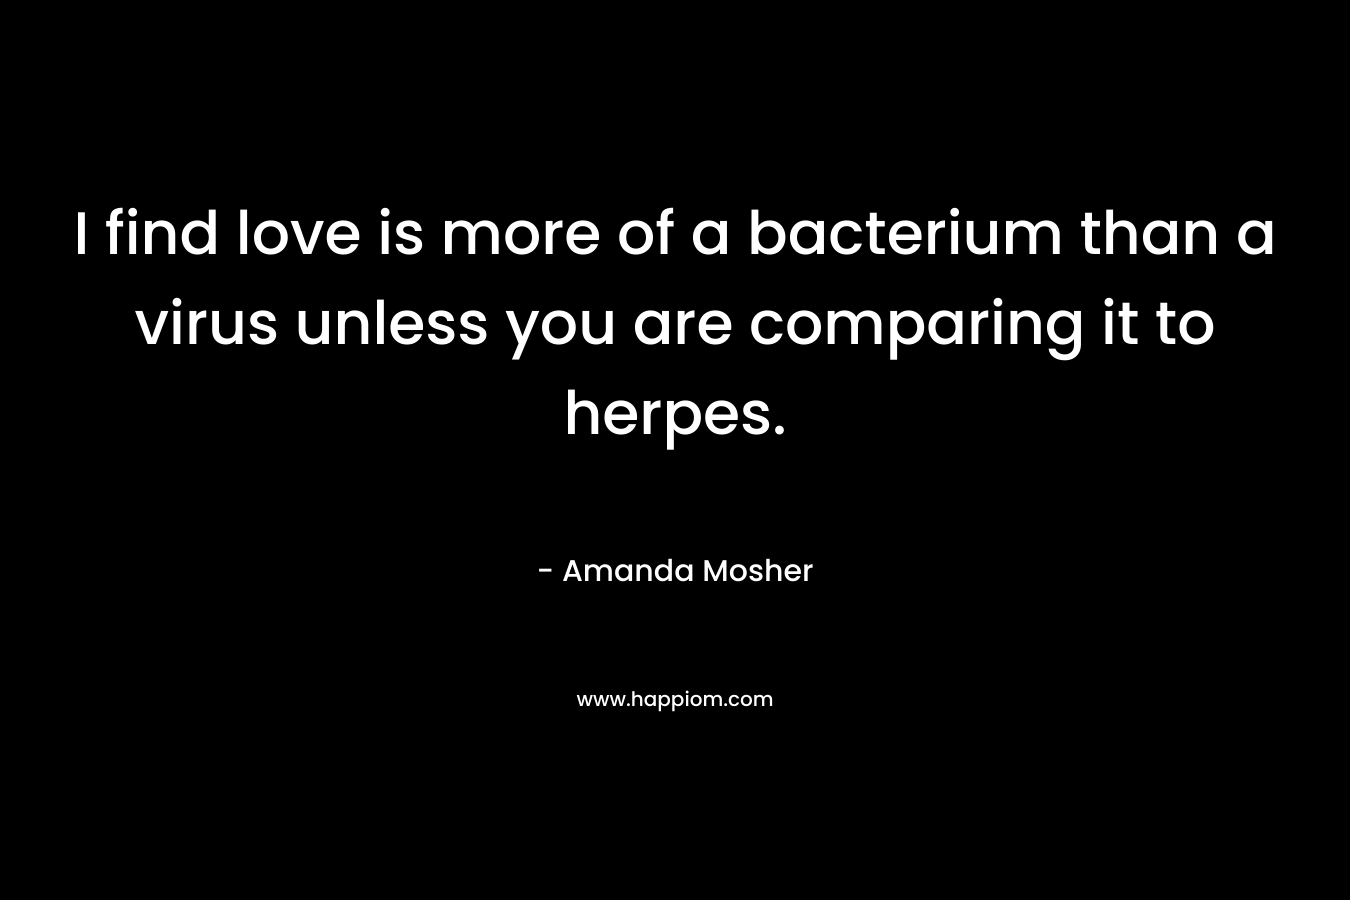 I find love is more of a bacterium than a virus unless you are comparing it to herpes.